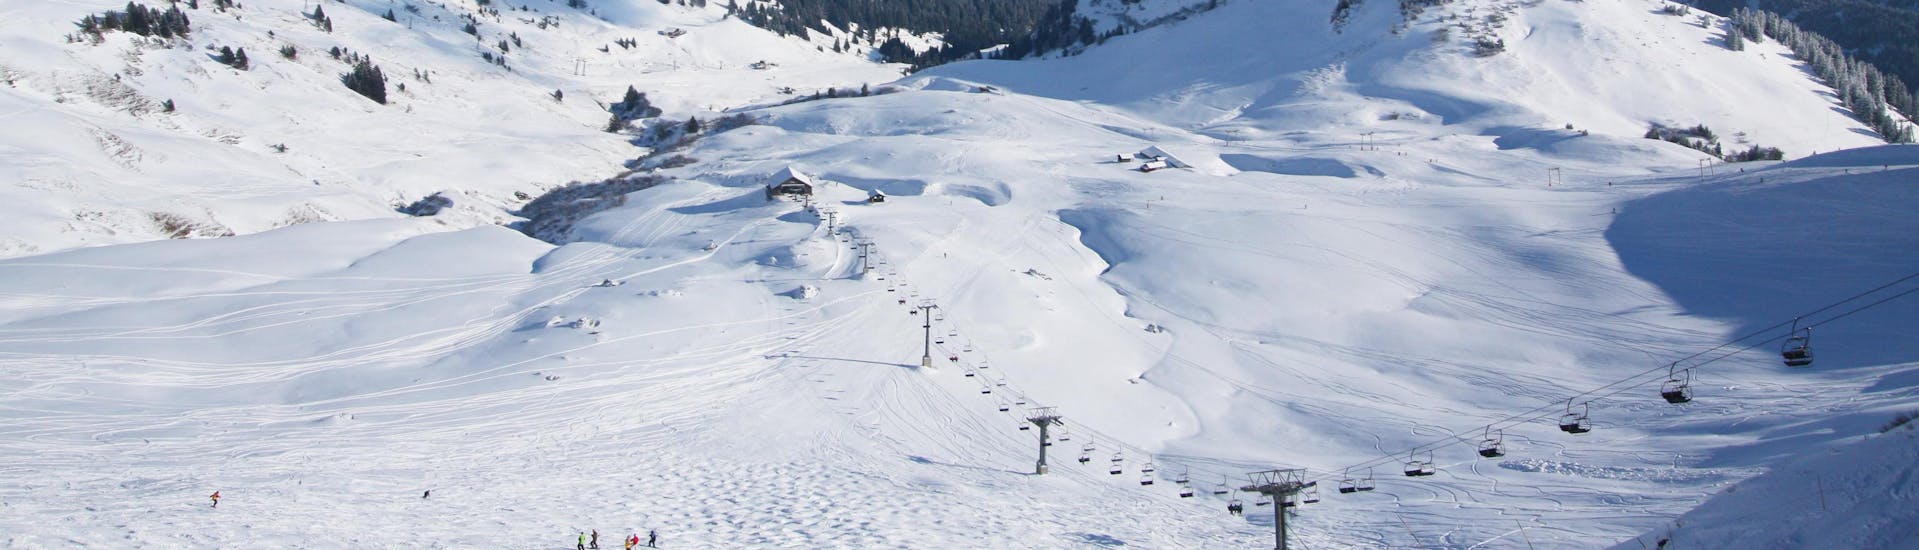 A view of the snowy slopes of the Swiss ski resort Les Crosets in the Les Portes du Soleil ski area where local ski schools offer a wide range of ski lessons to those who want to learn to ski.